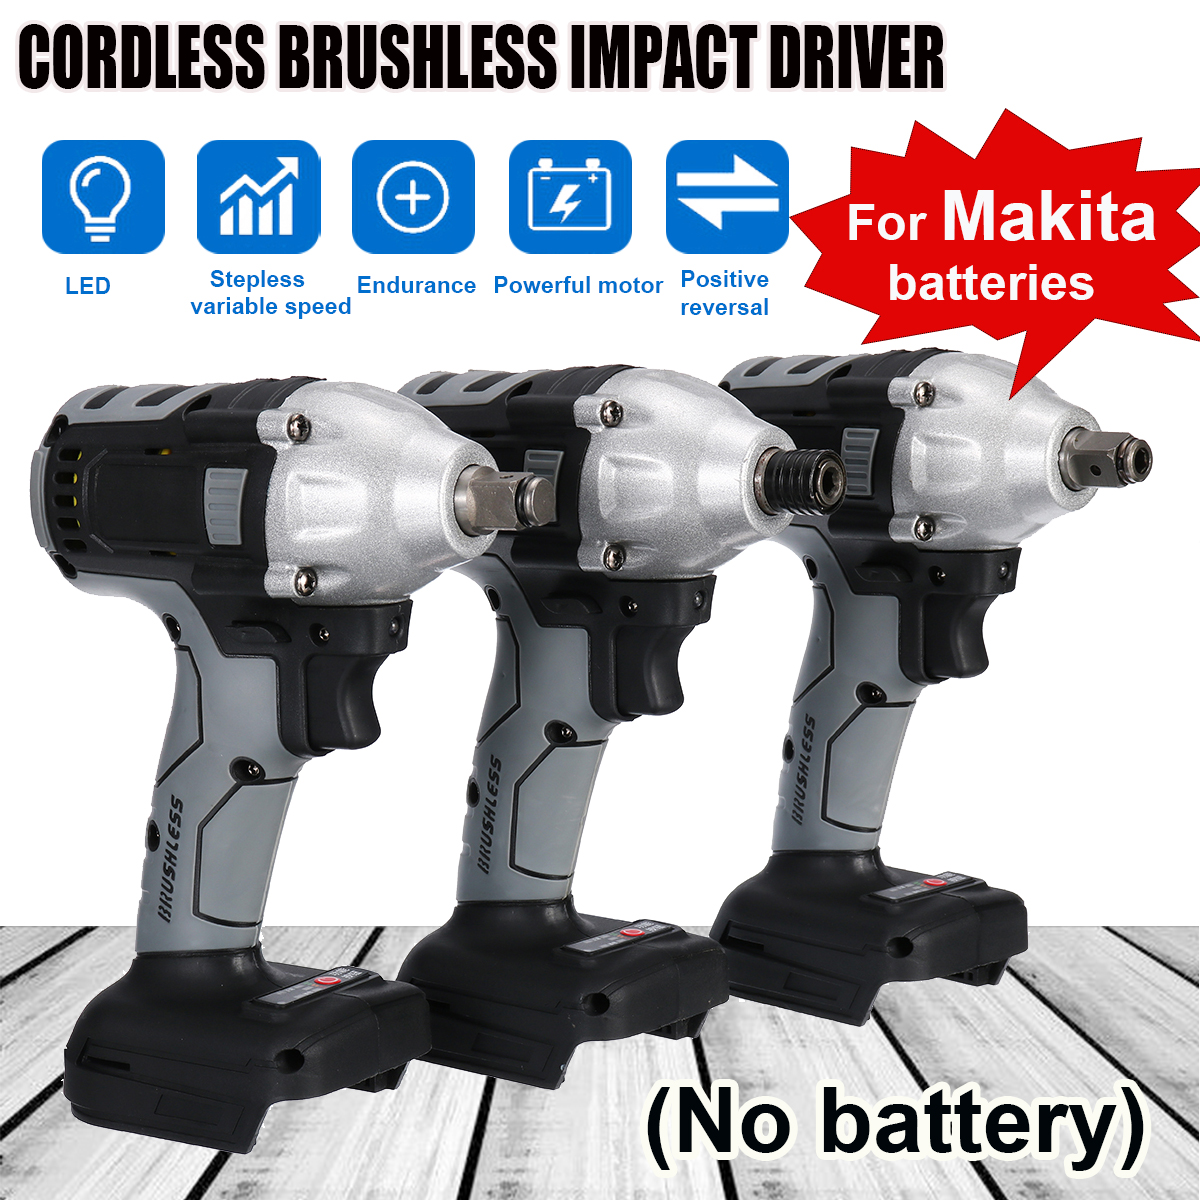 Gray-Cordless-Brushless-Impact-Wrench-Drill-Drive-Machine-For-Makita-18V-Battery-1769332-1